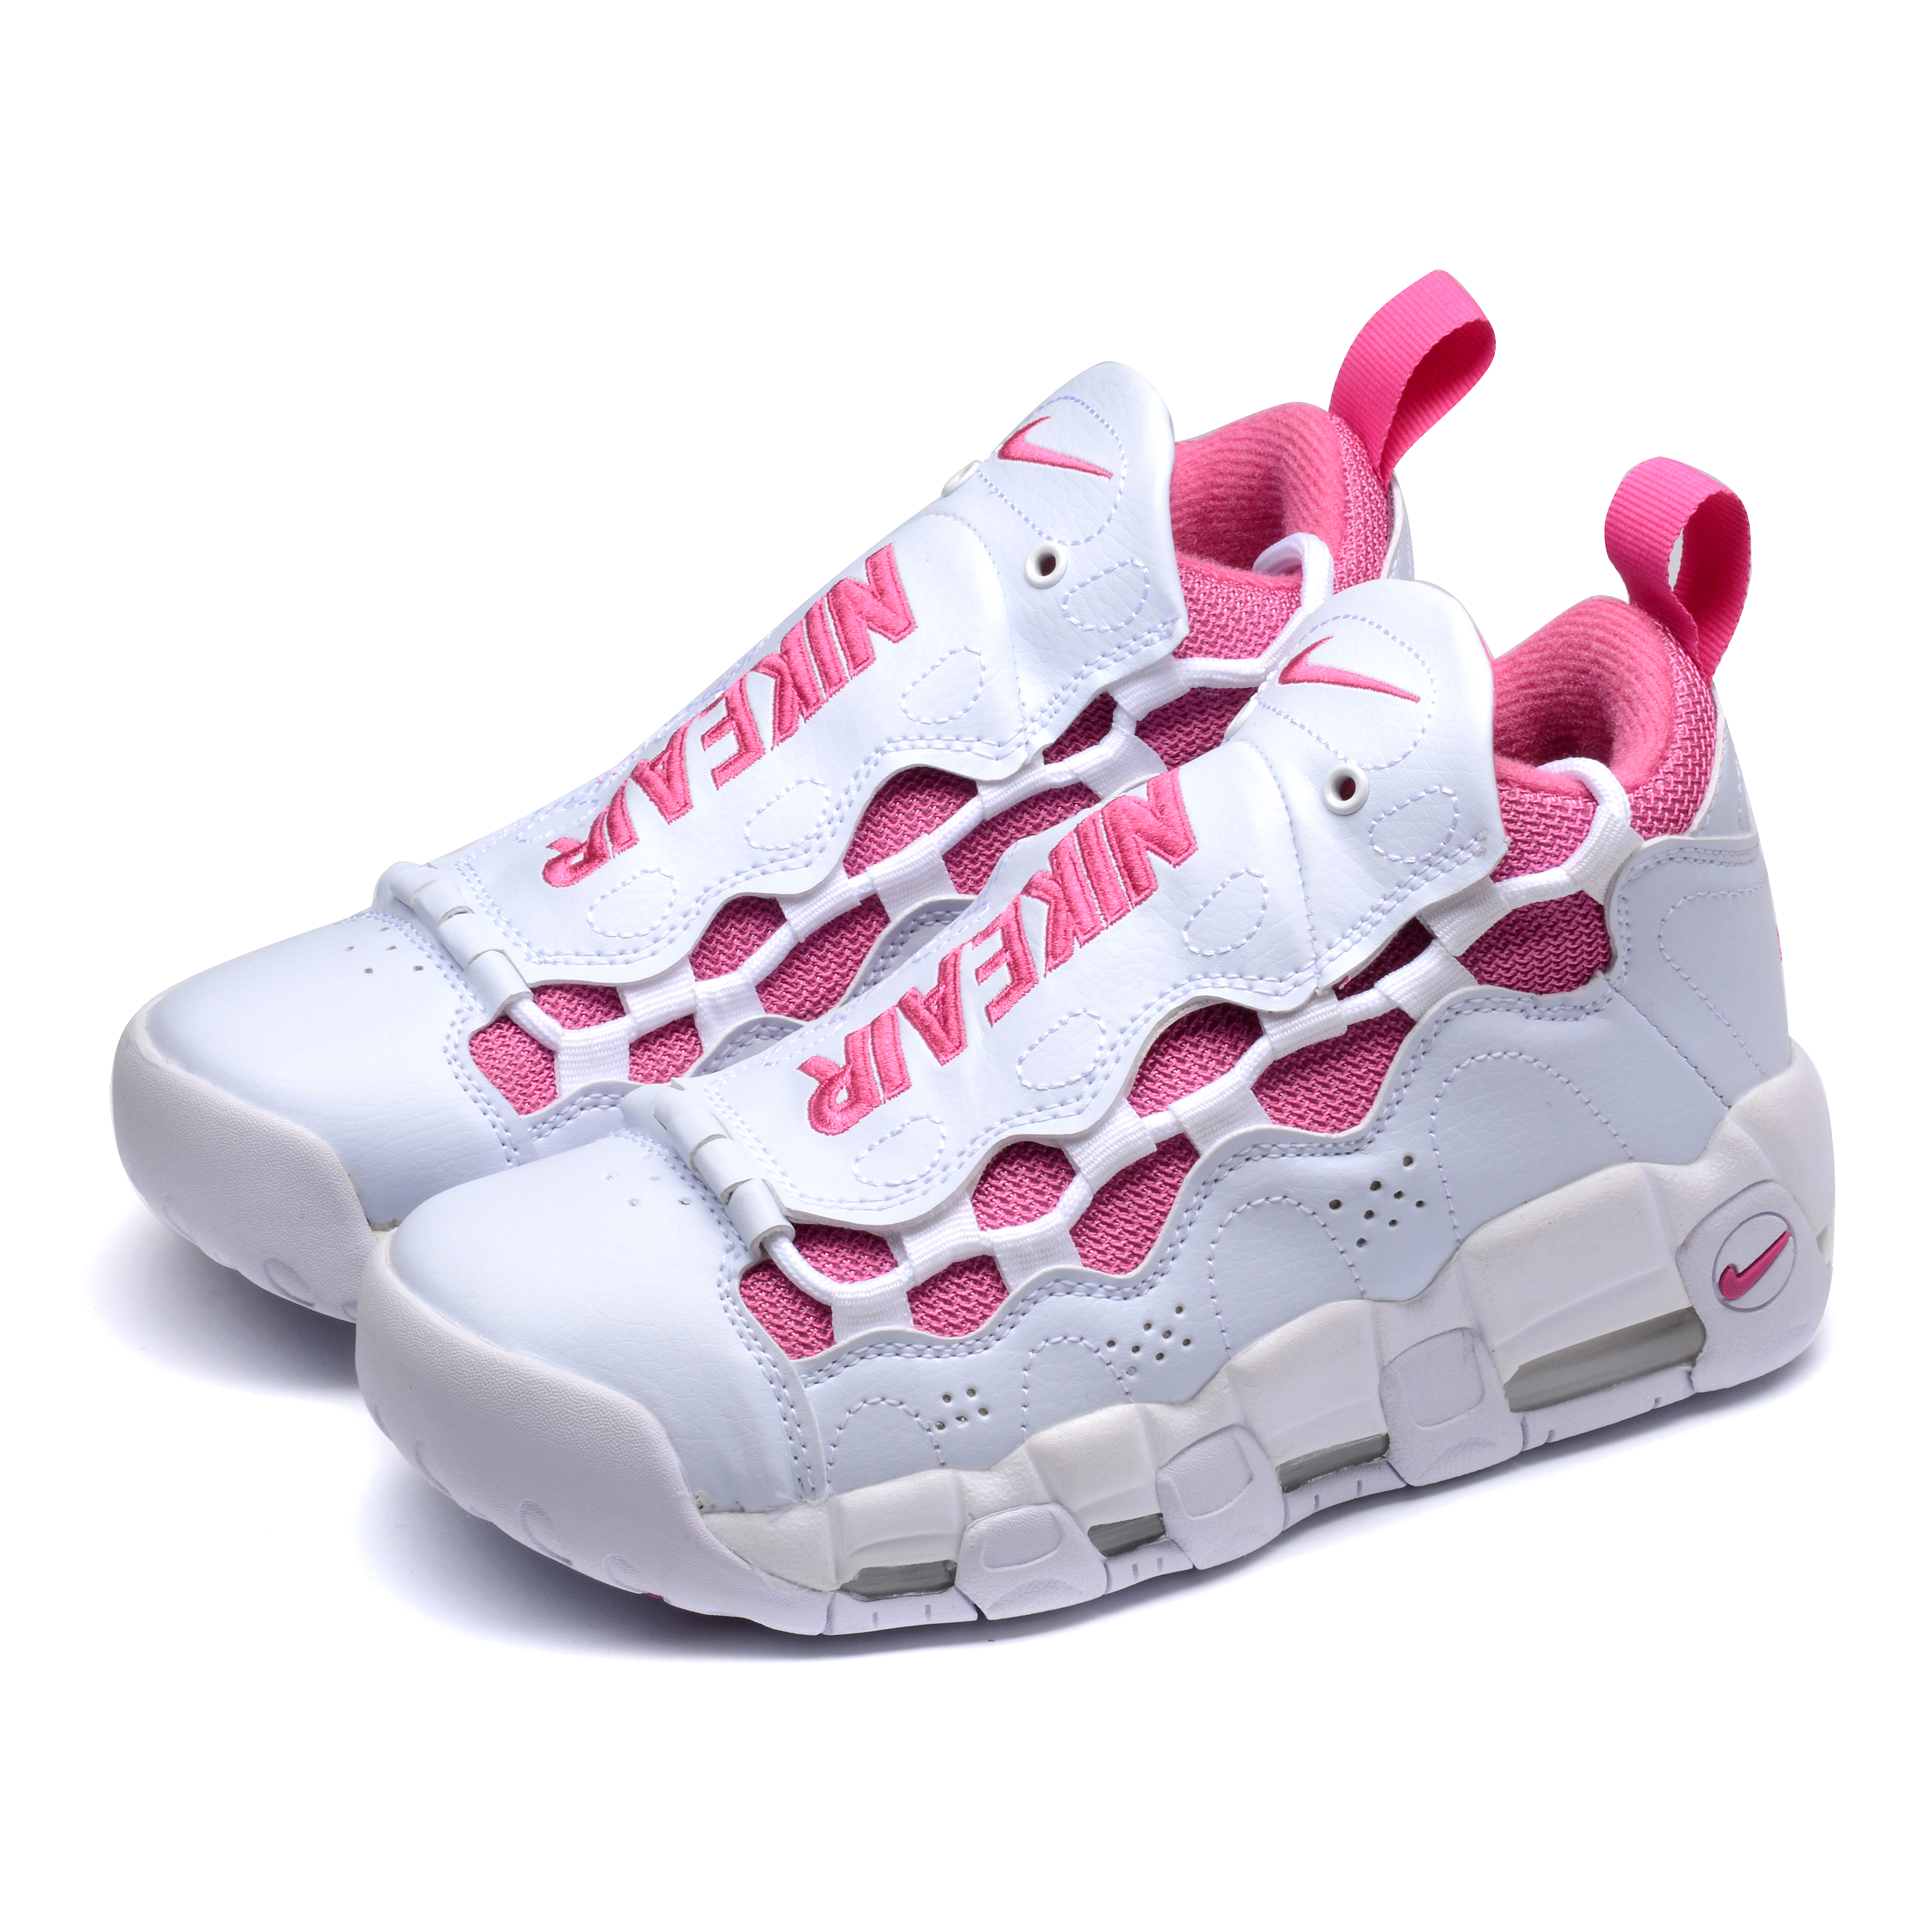 Men Nike Air More Money QS White Pink Lover Shoes